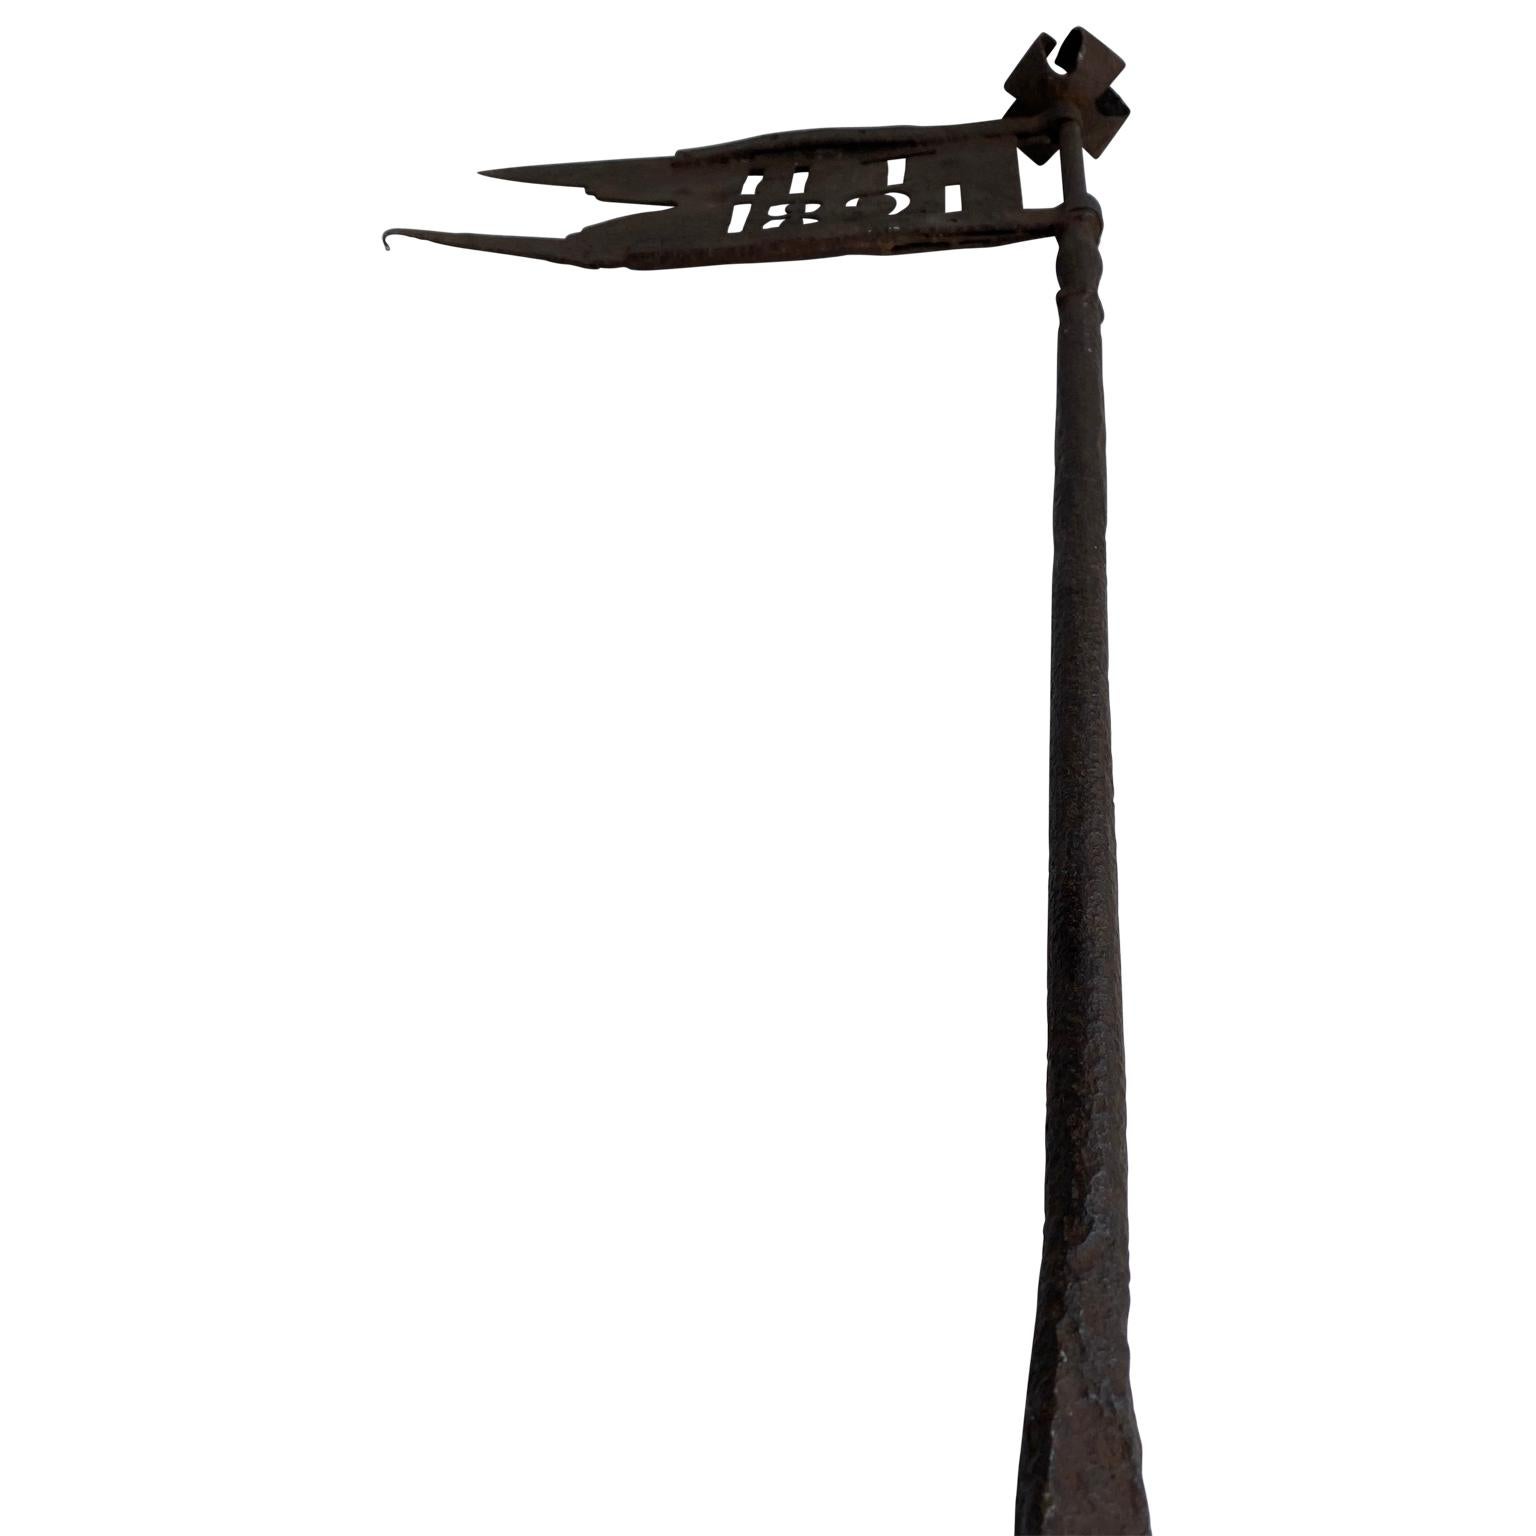 Hammered Danish Early 19th Century Iron Weather-Vane With Rose Finial, Dated 1821